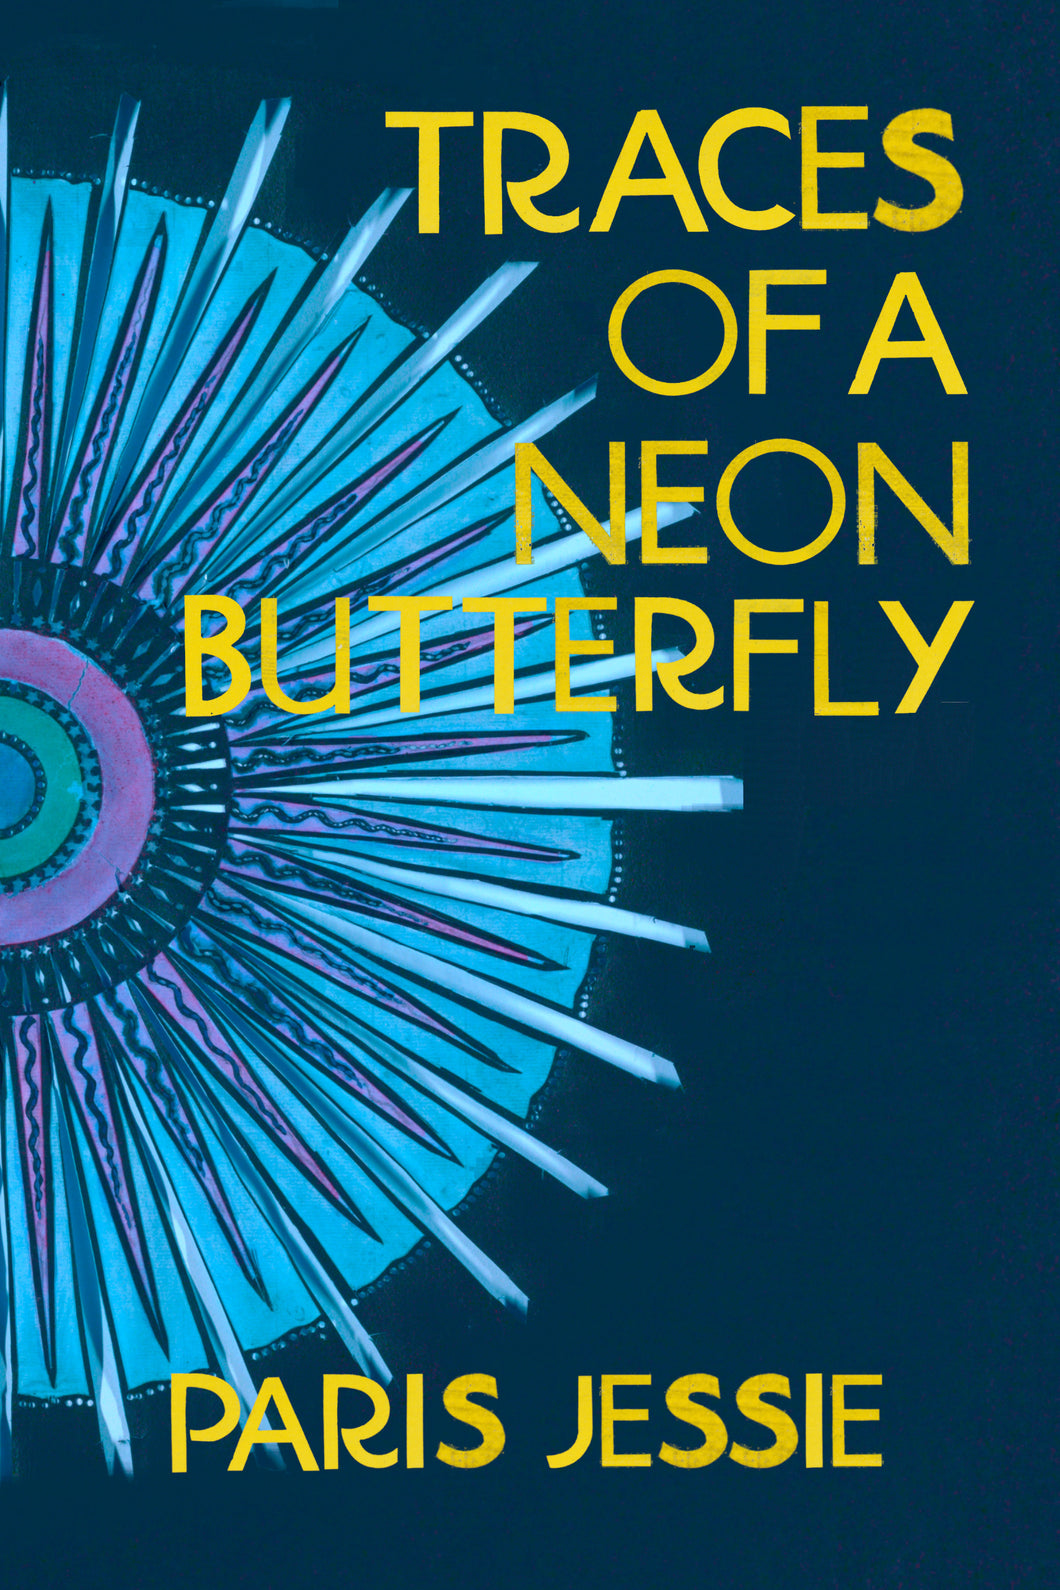 Traces of a Neon Butterfly, by Paris Jessie-Print Books-Bottlecap Press